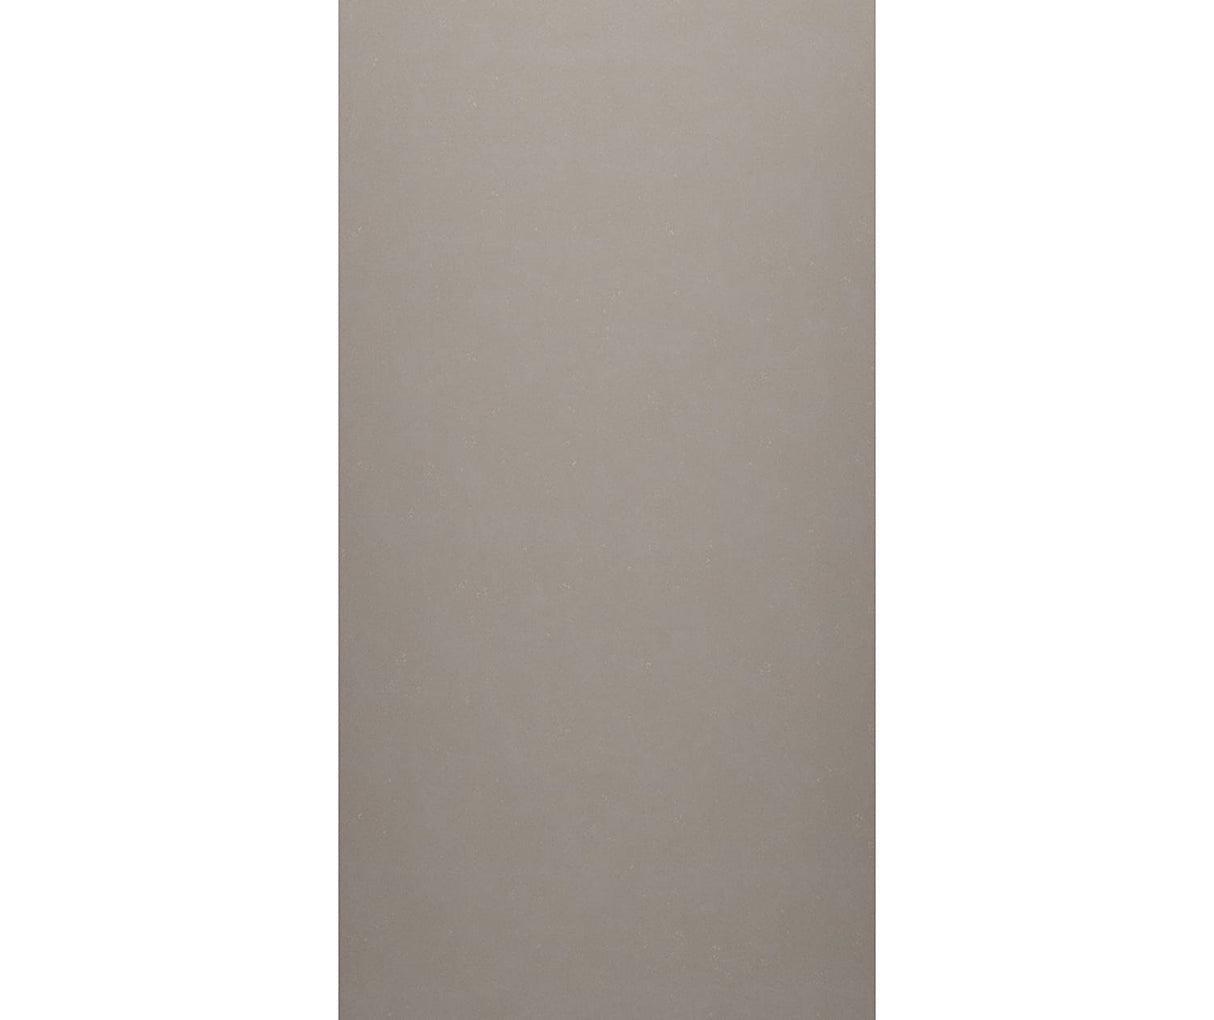 Swanstone SMMK-8442-1 42 x 84 Swanstone Smooth Tile Glue up Bathtub and Shower Single Wall Panel in Clay SMMK8442.212